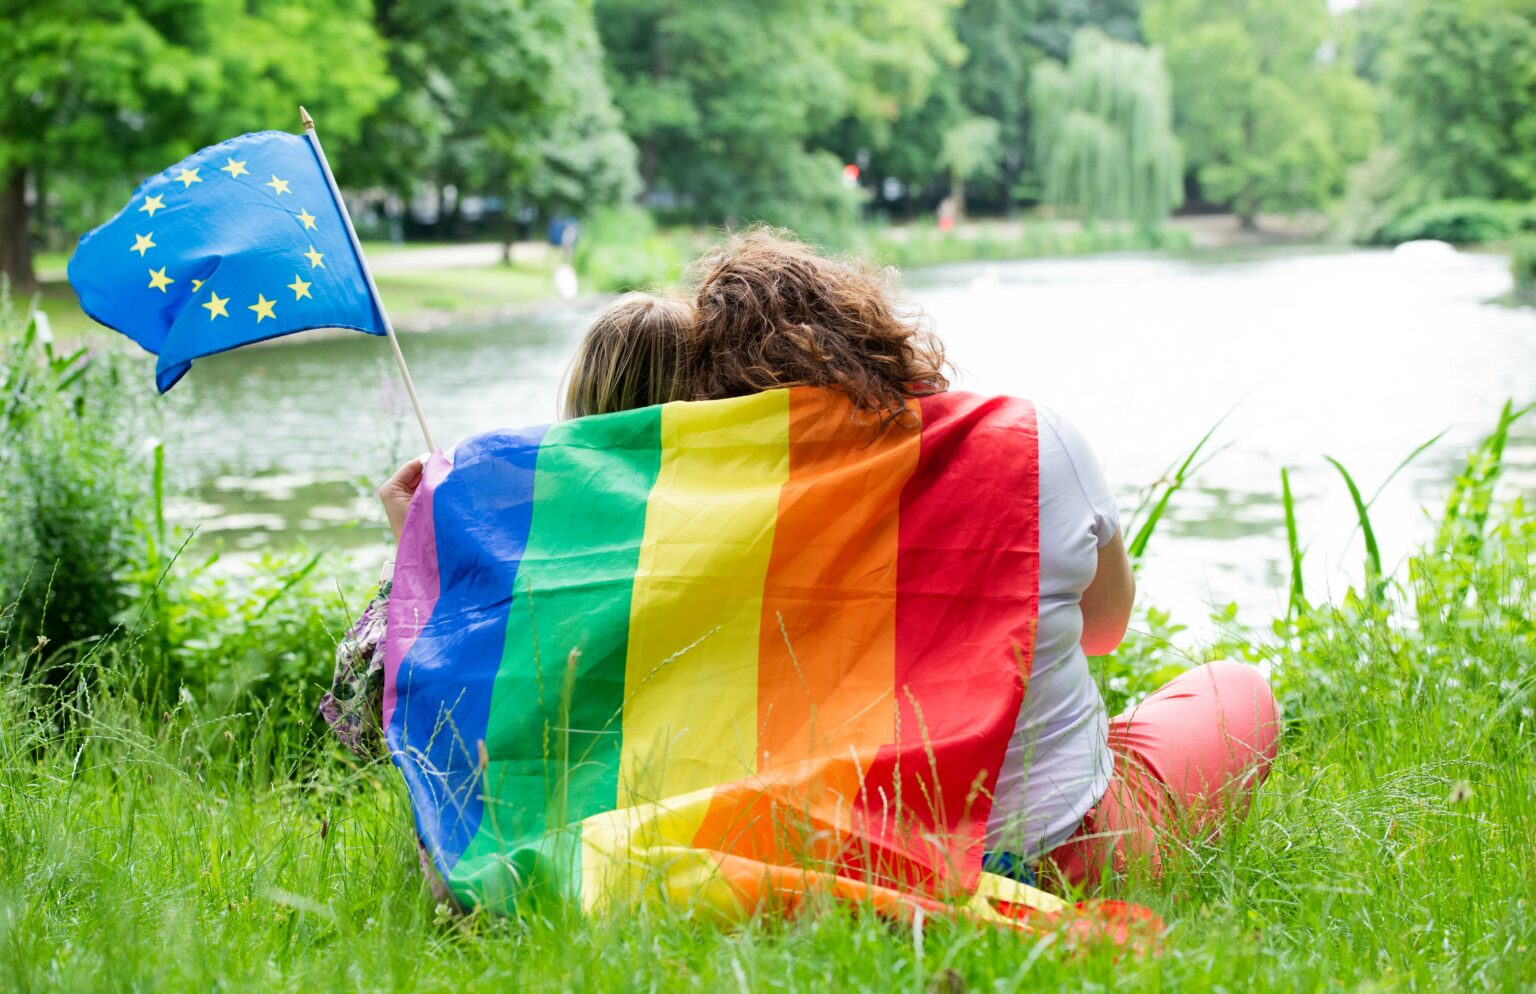 Two people wrapped in the rainbow flag and waving a small EU flag.